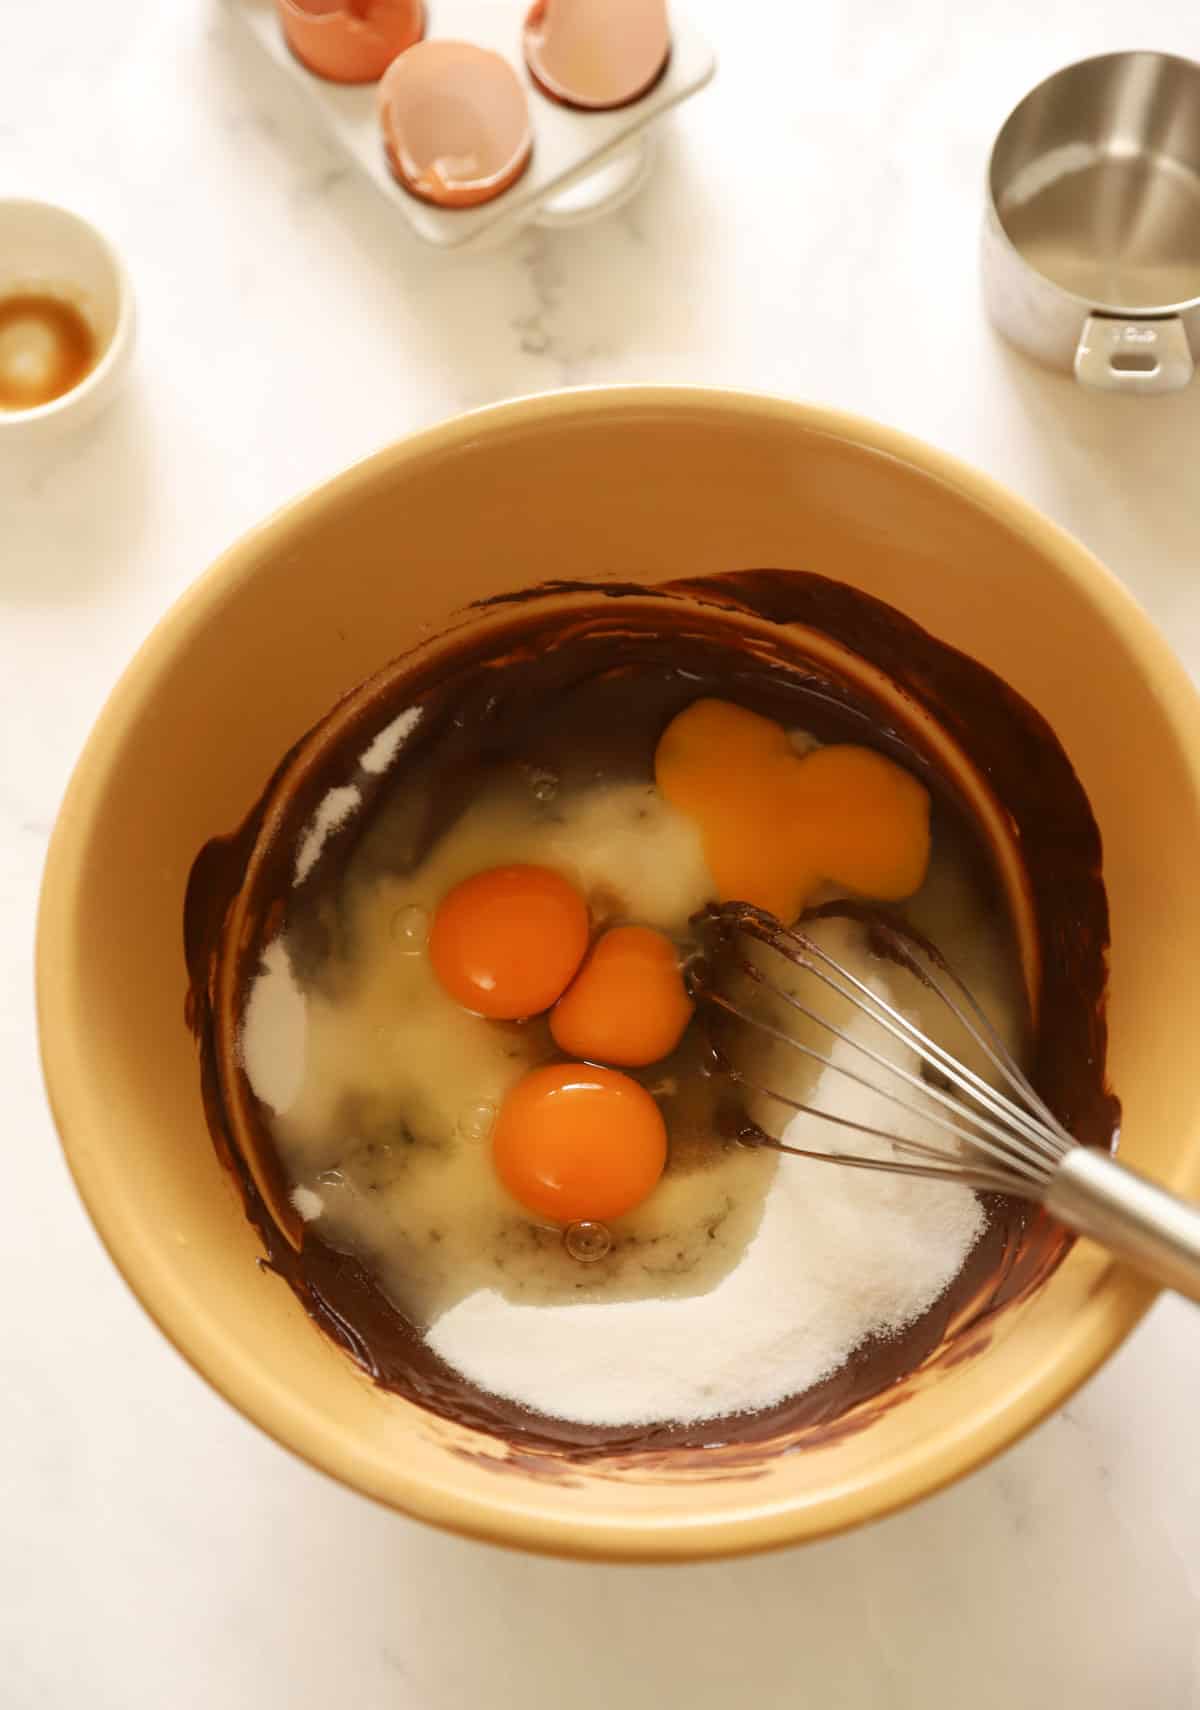 eggs, sugar, chocolate and butter in a bowl